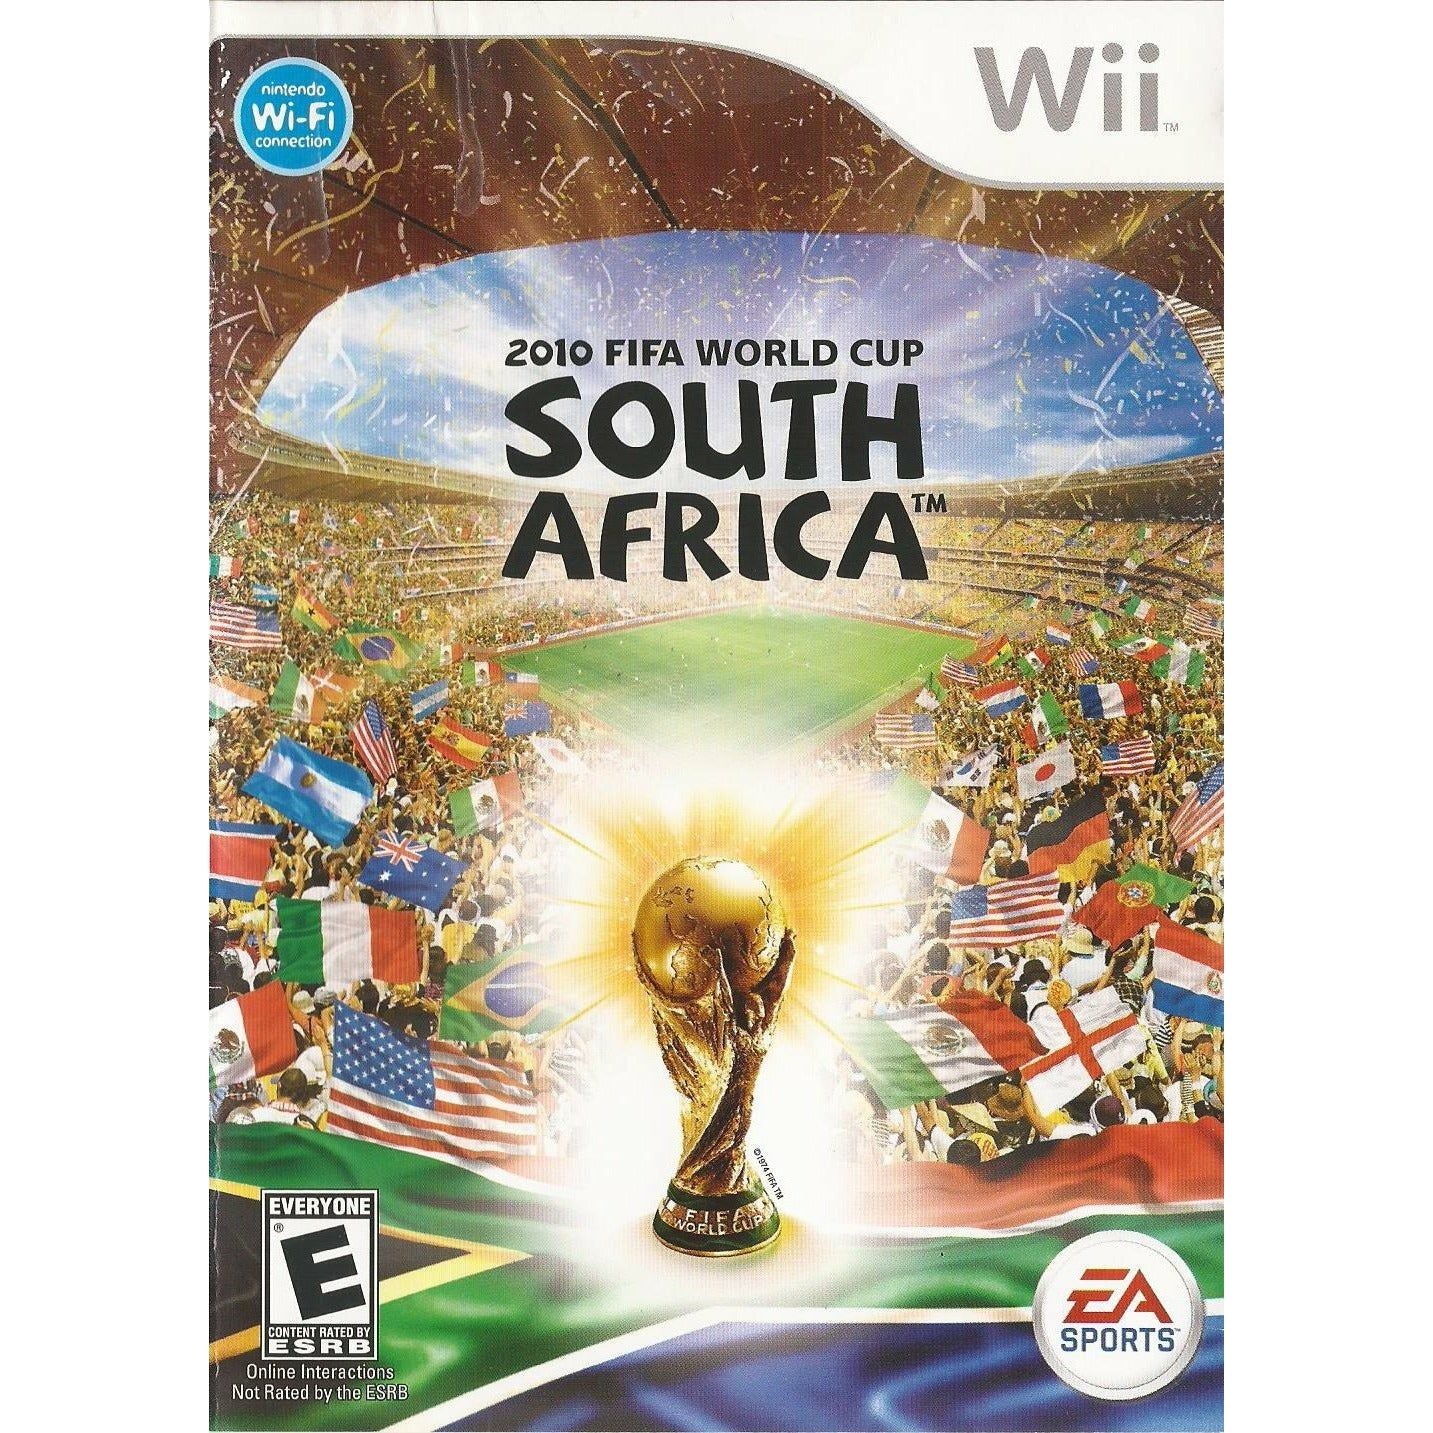 Wii - 2010 FIFA World Cup South Africa